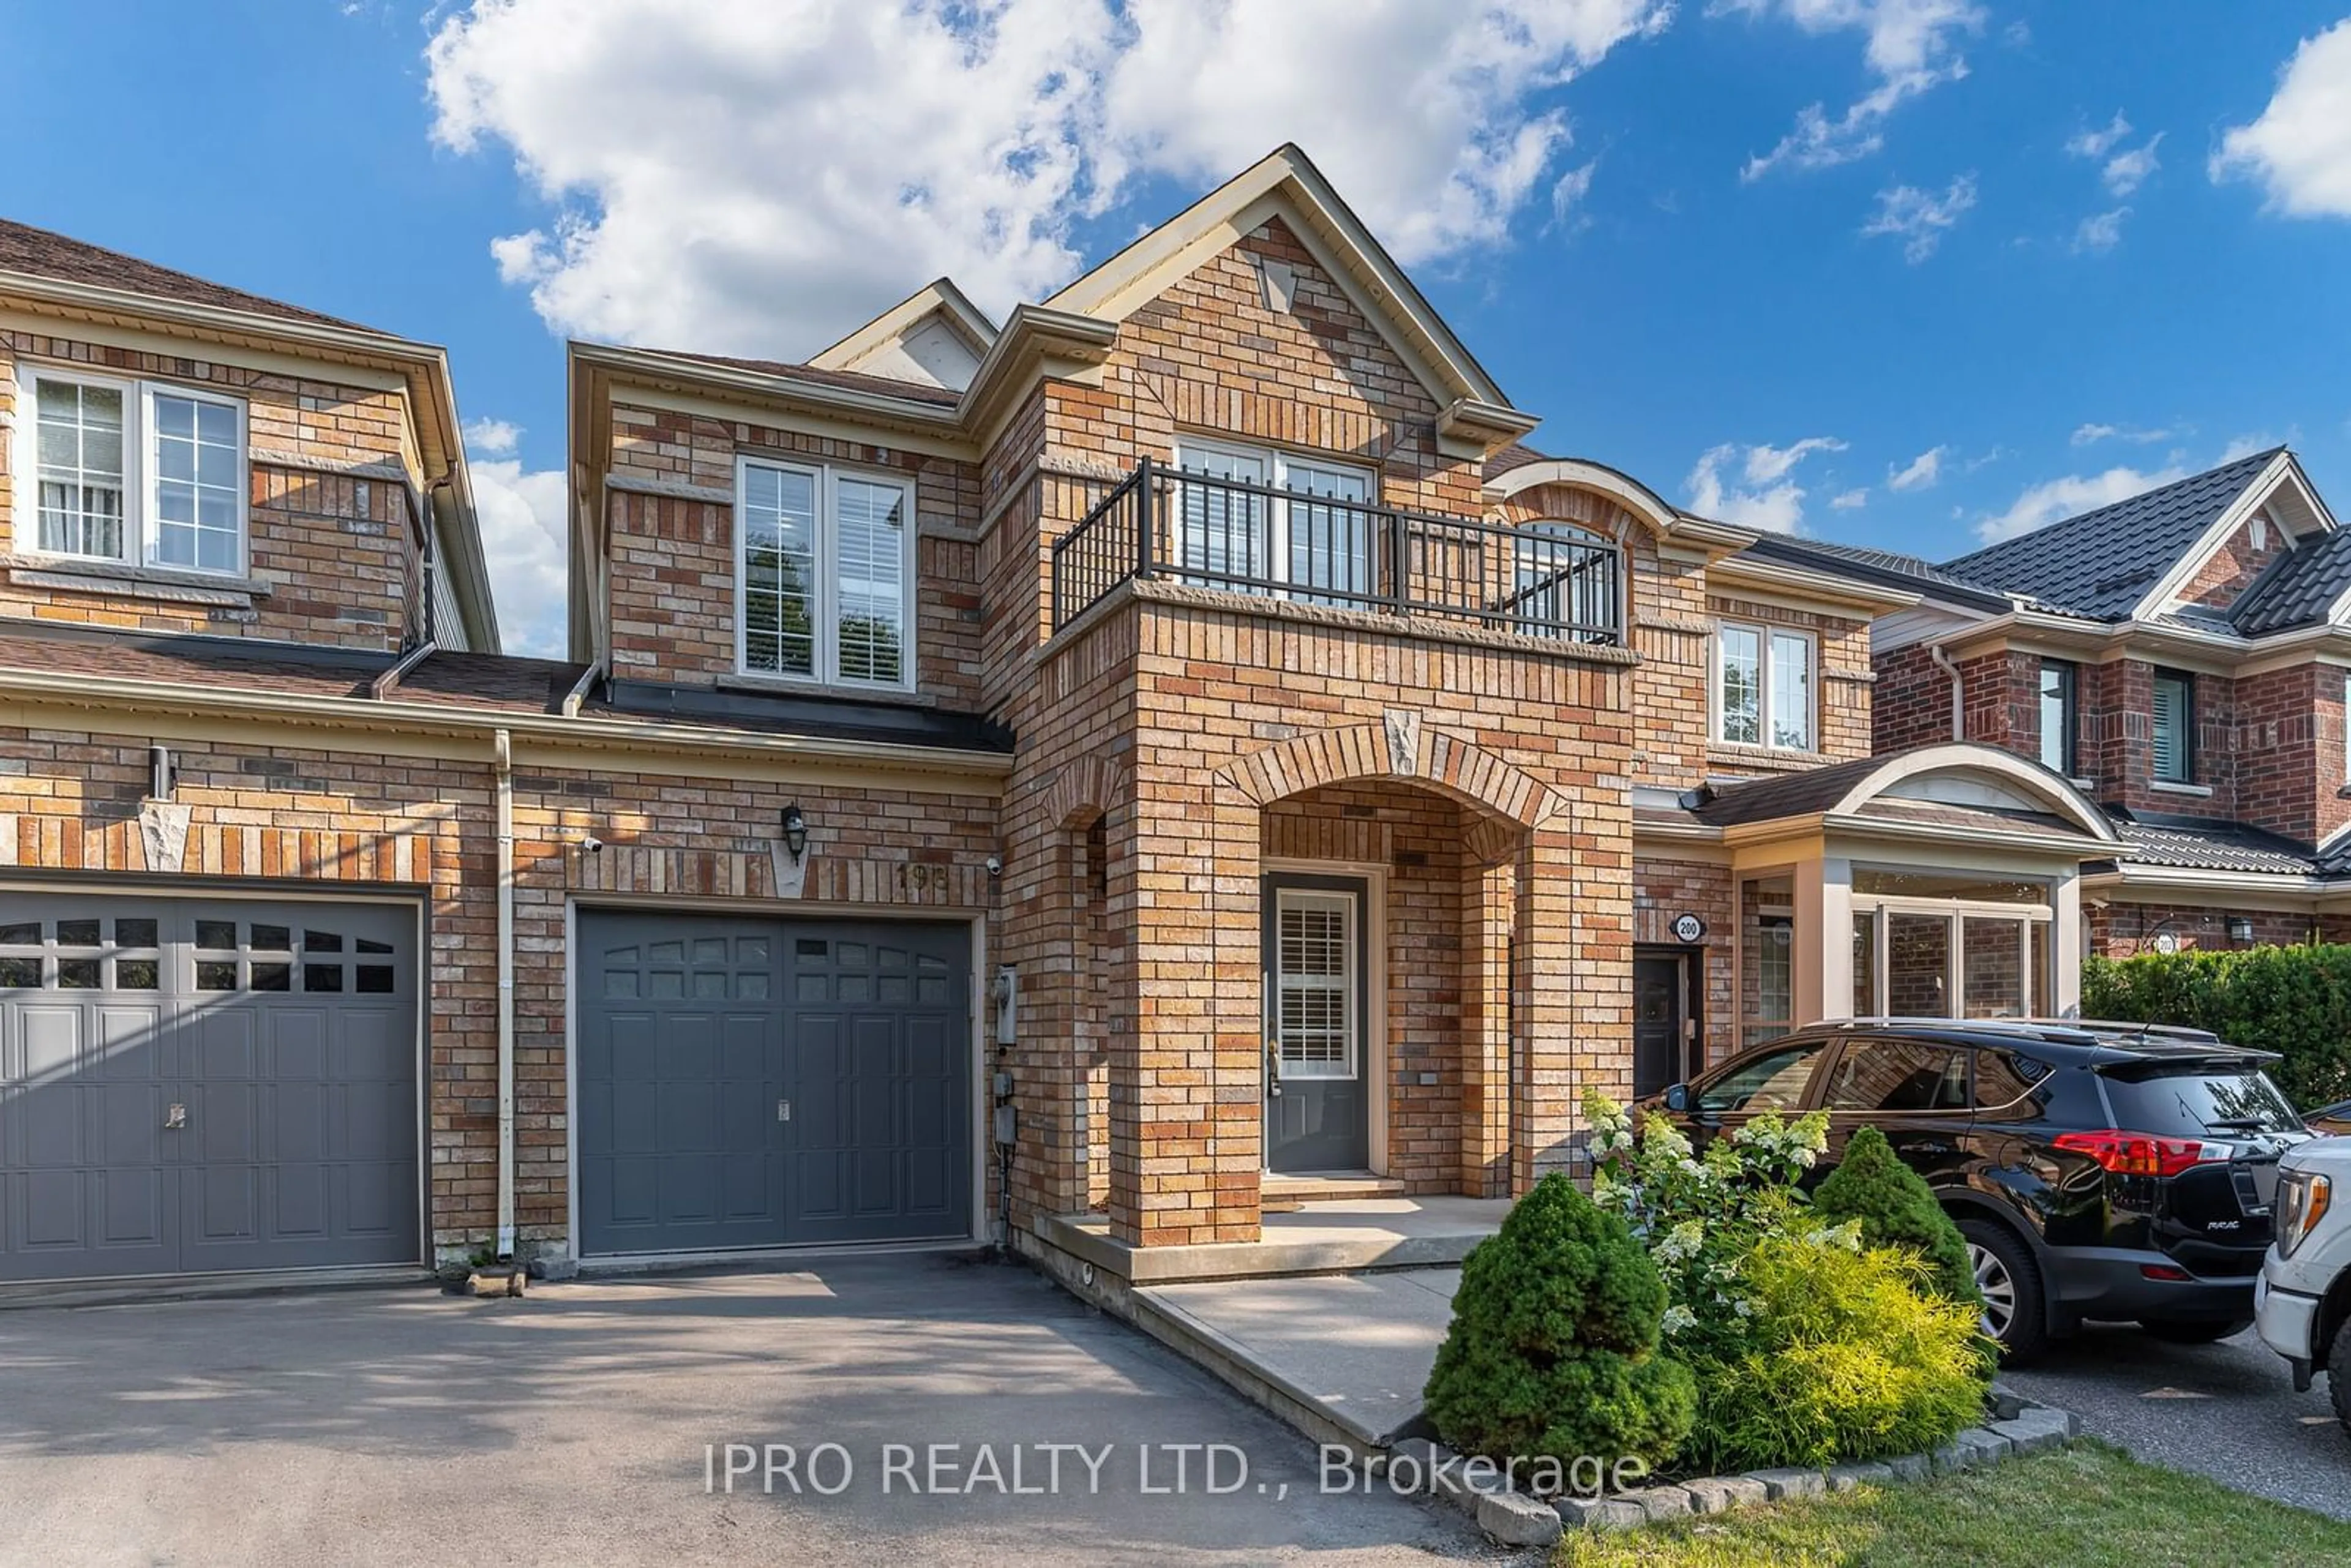 Home with brick exterior material for 198 Venice Gate Dr, Vaughan Ontario L4H 0E9